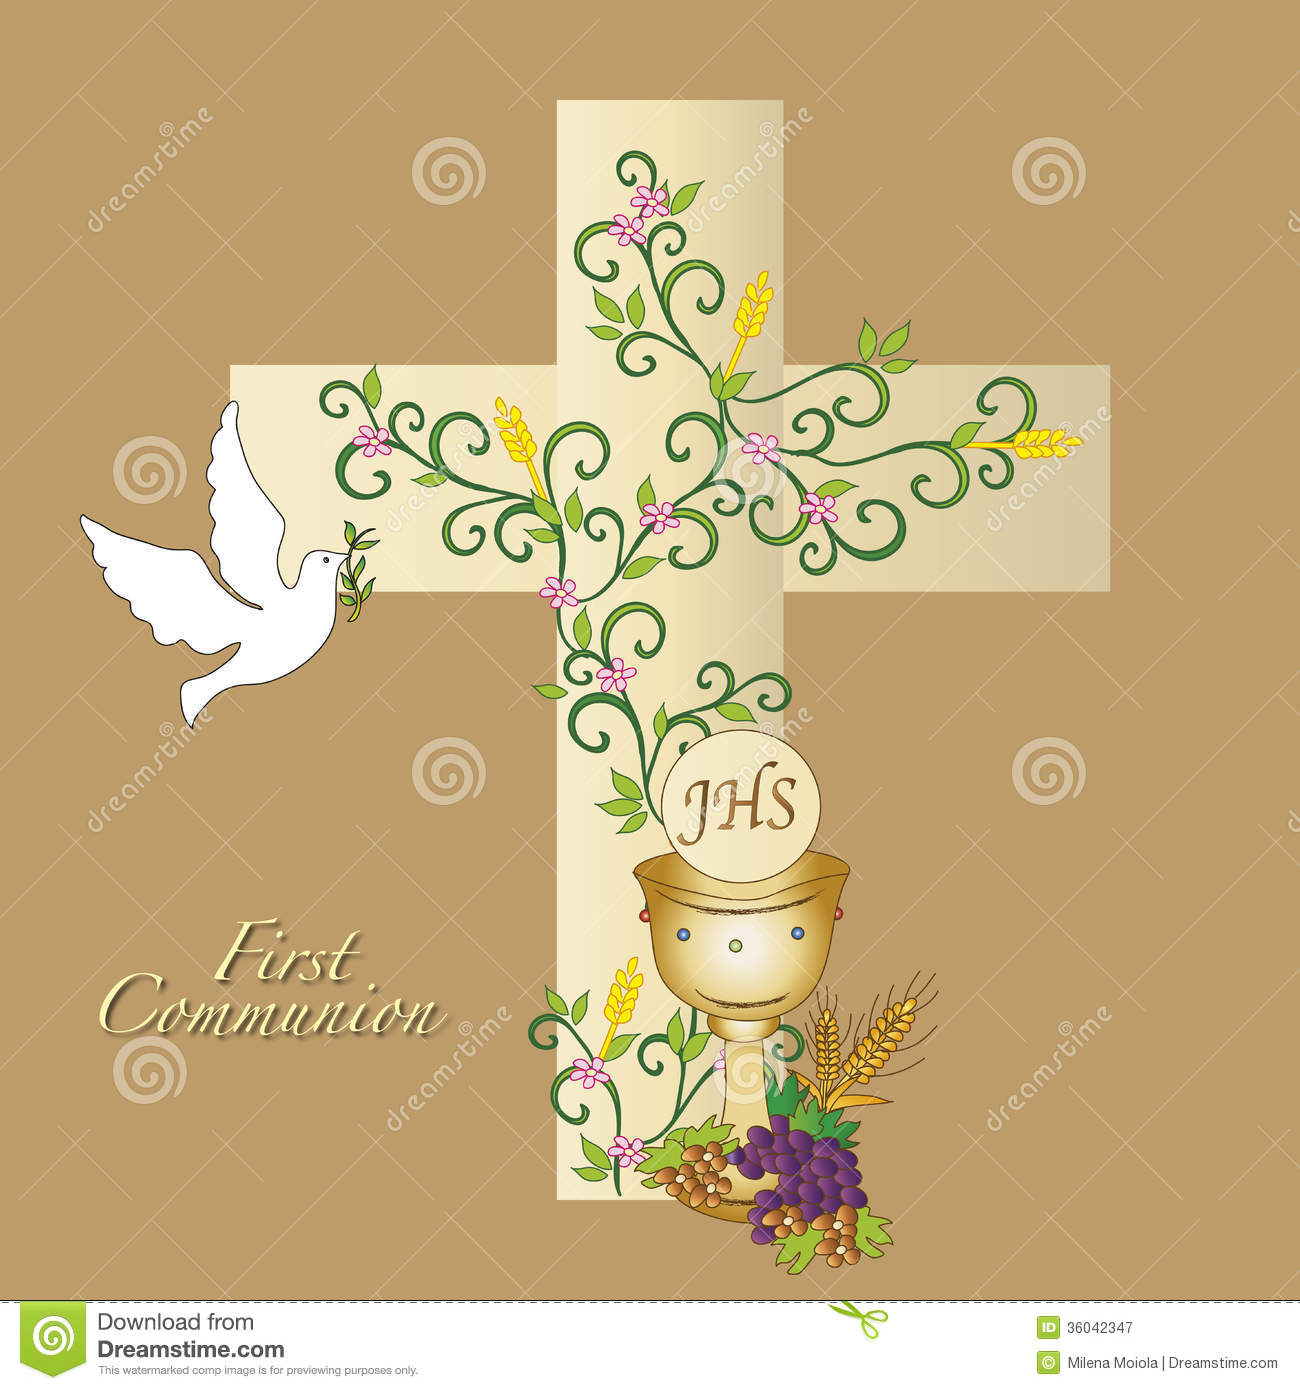 First Communion Royalty Free Stock Photography   Image  36042347